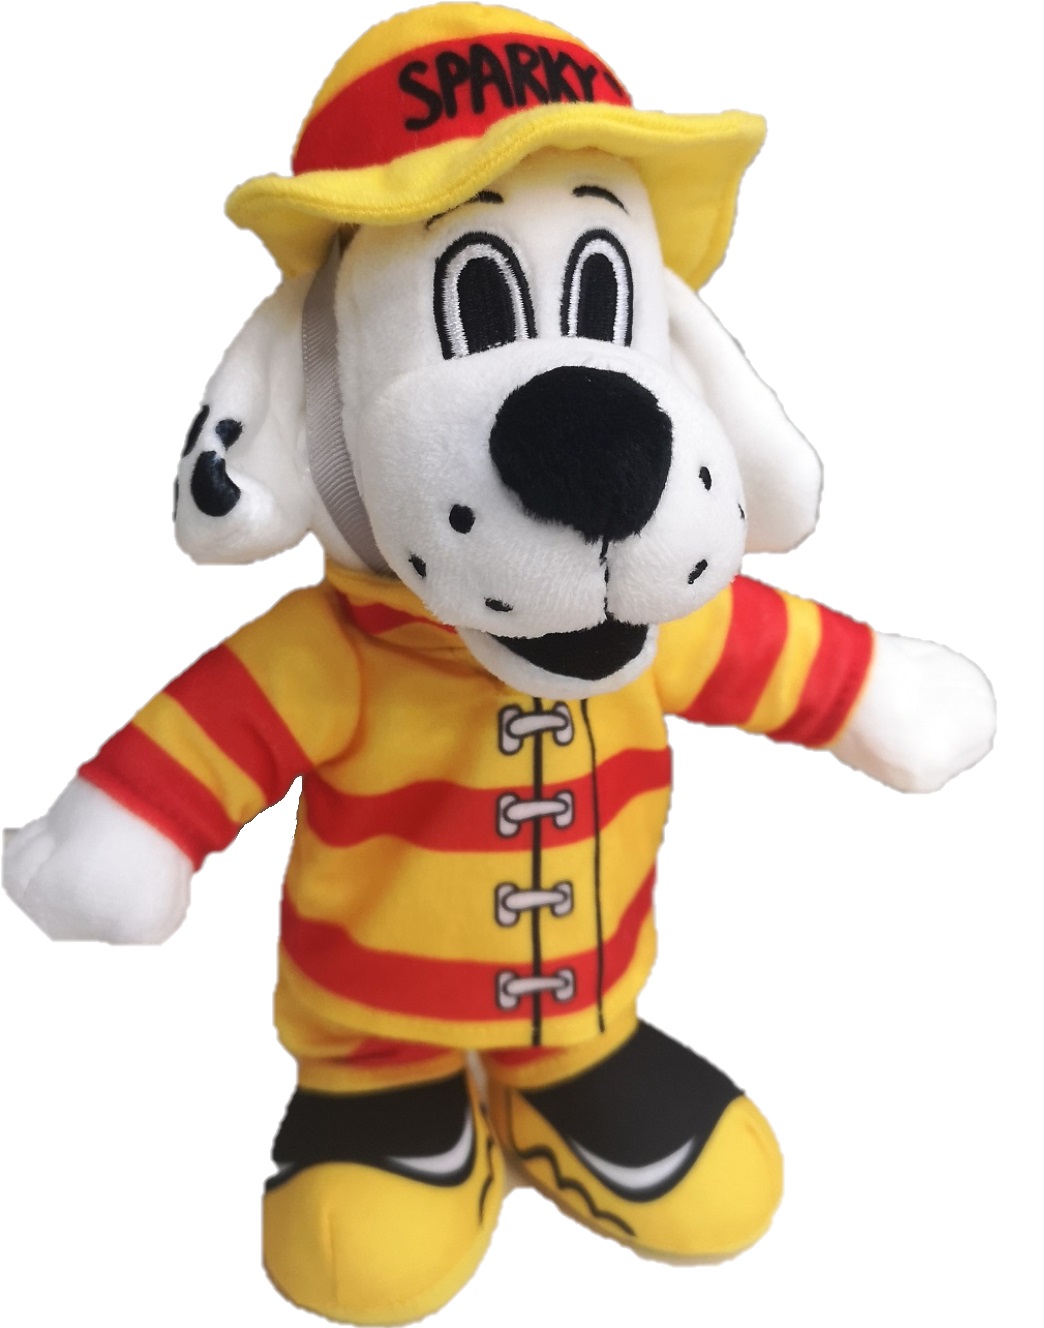 Sparky the Fire Dog Stuffy - Firehall Bookstore